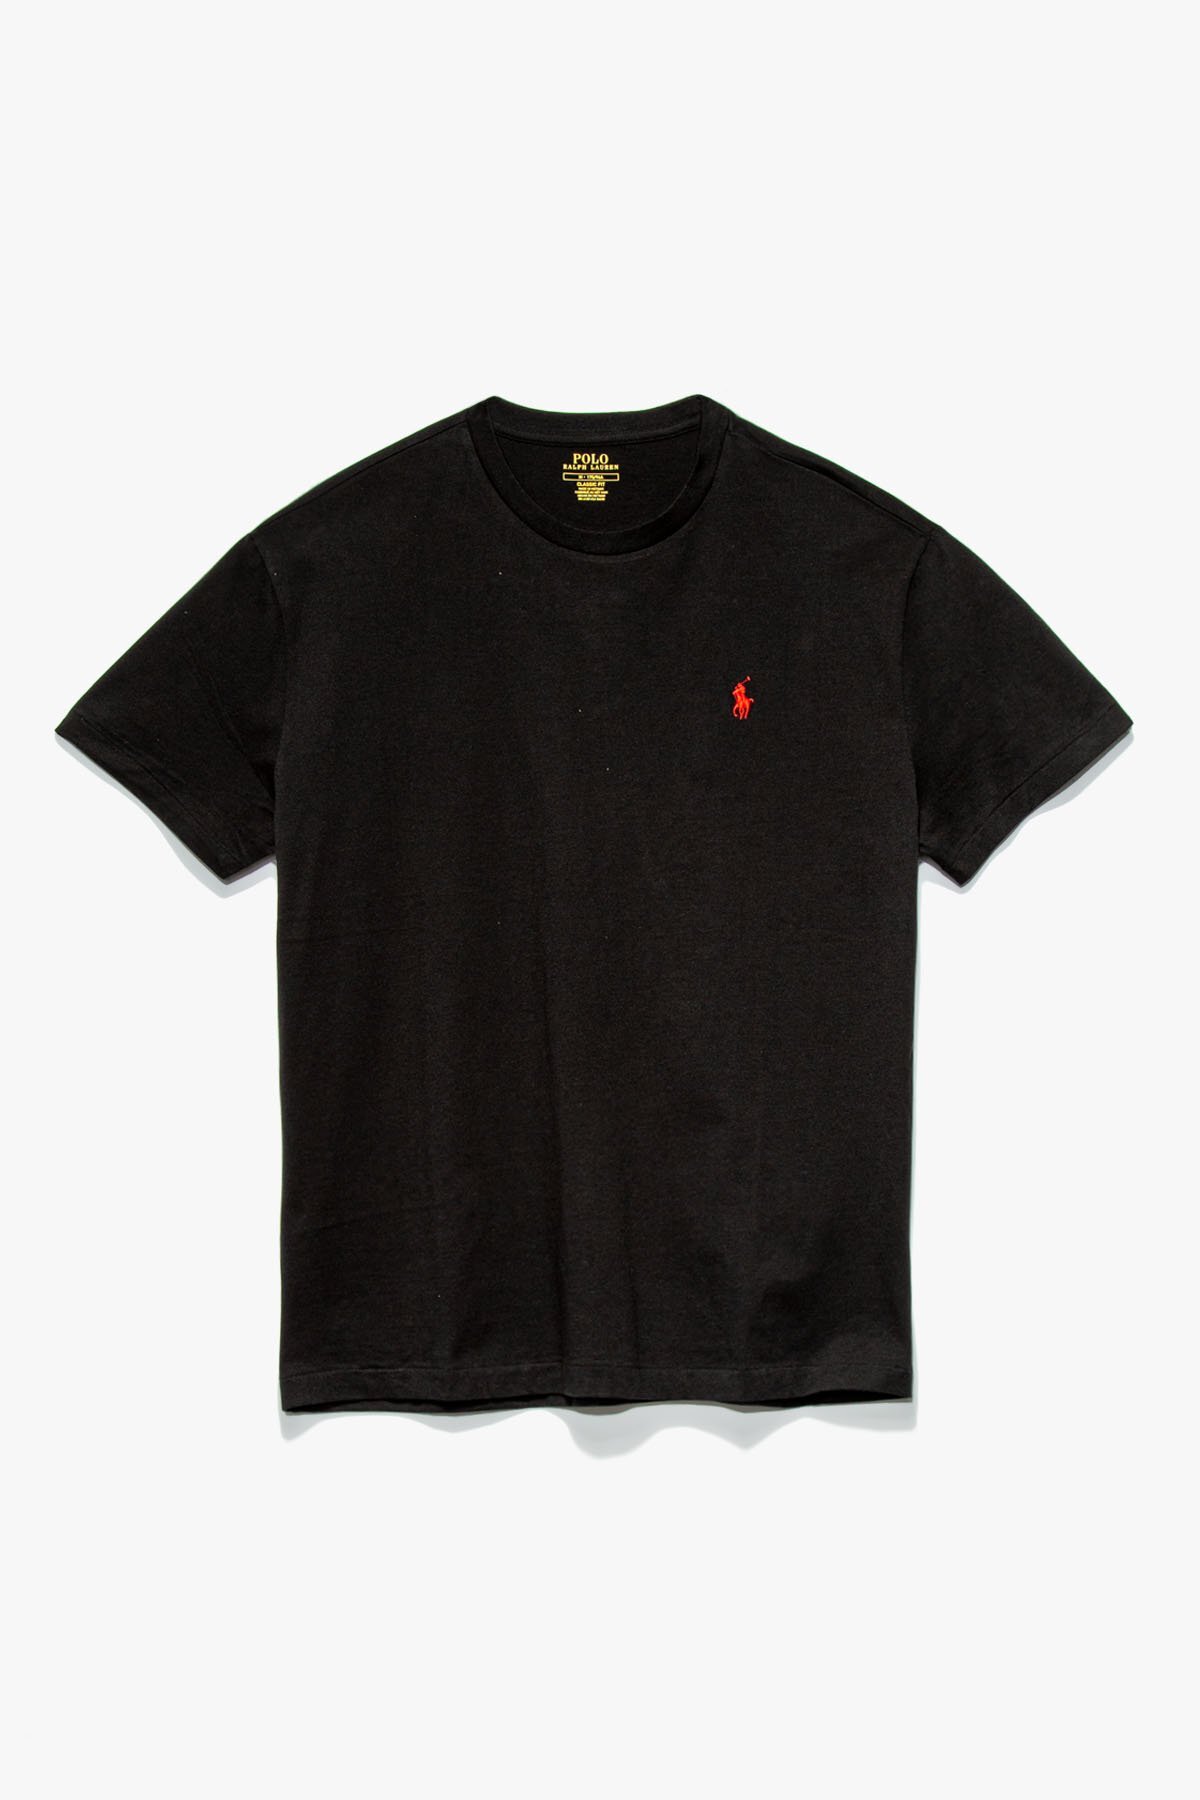 60% OFF the Polo Ralph Lauren Classic Fit T-shirts — Sneaker Shouts